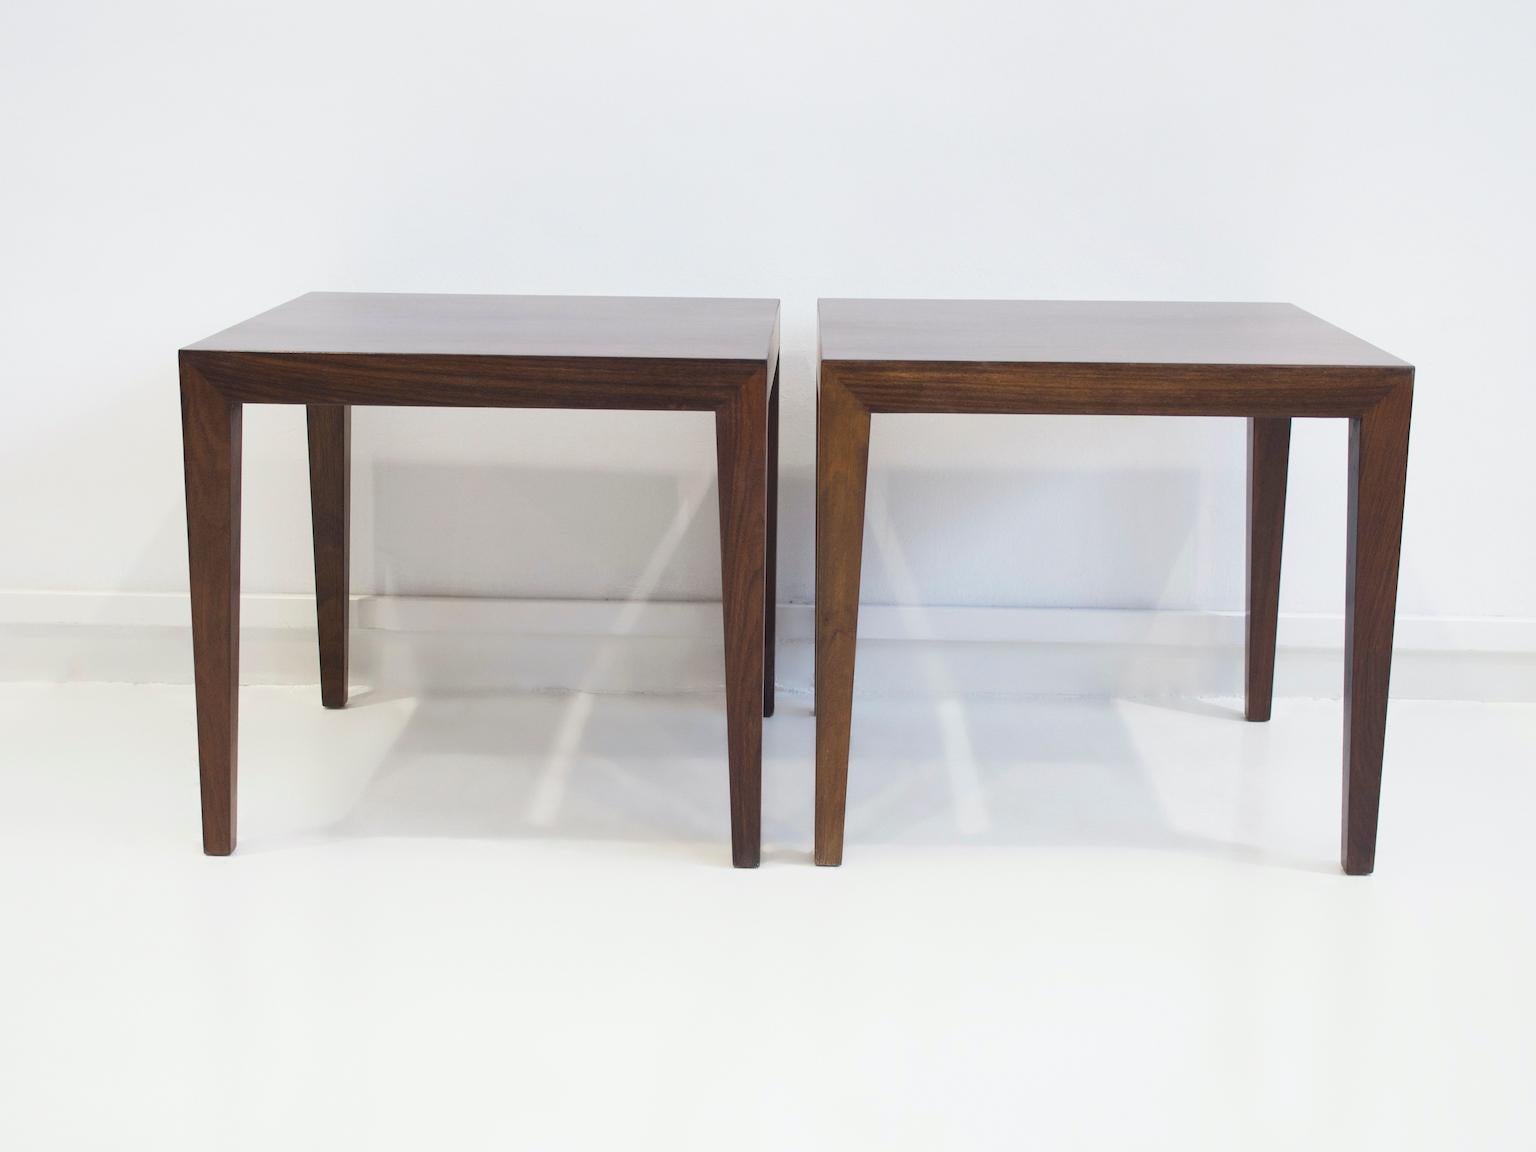 Pair of minimalist hardwood side tables with tapered legs. Designed by Severin Hansen Jr. and manufactured by Haslev Møbelsnedkeri A/S in Denmark.